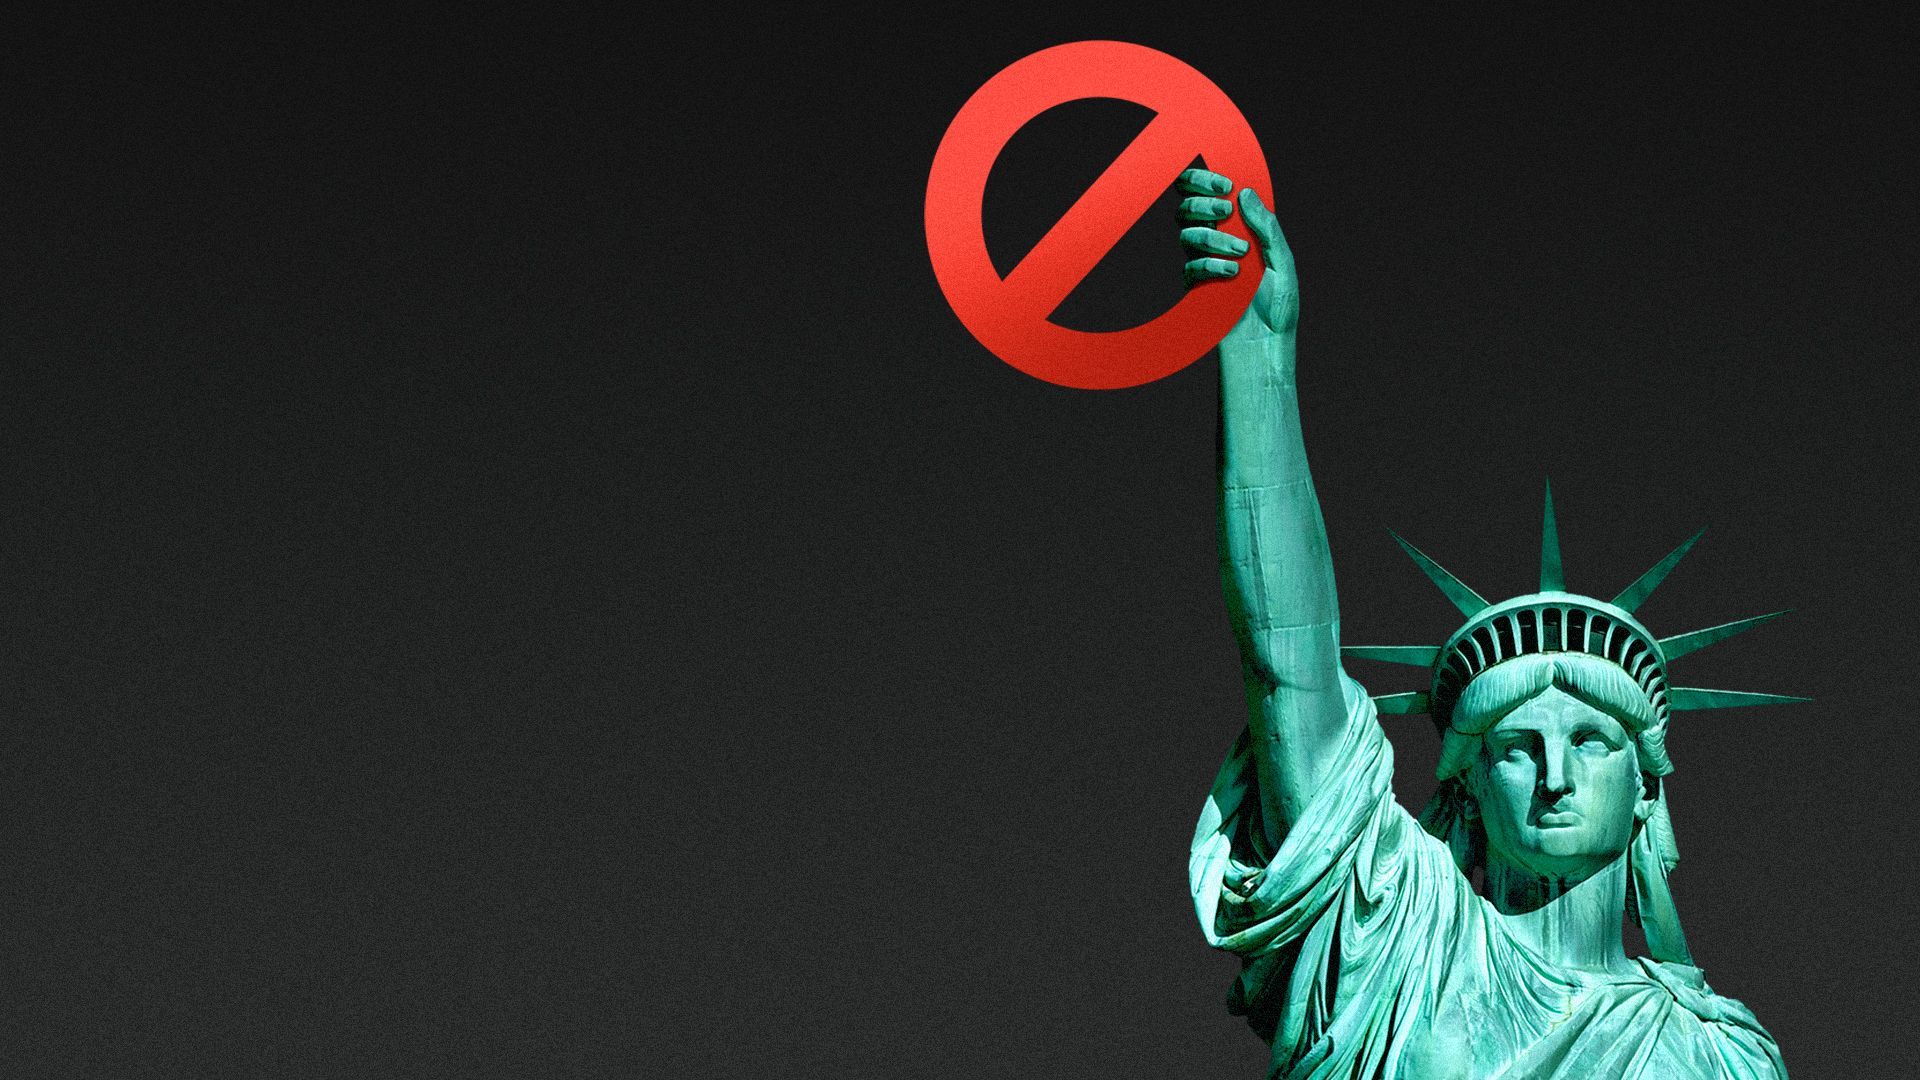 Illustration of the Statue of Liberty holding a "no" symbol.